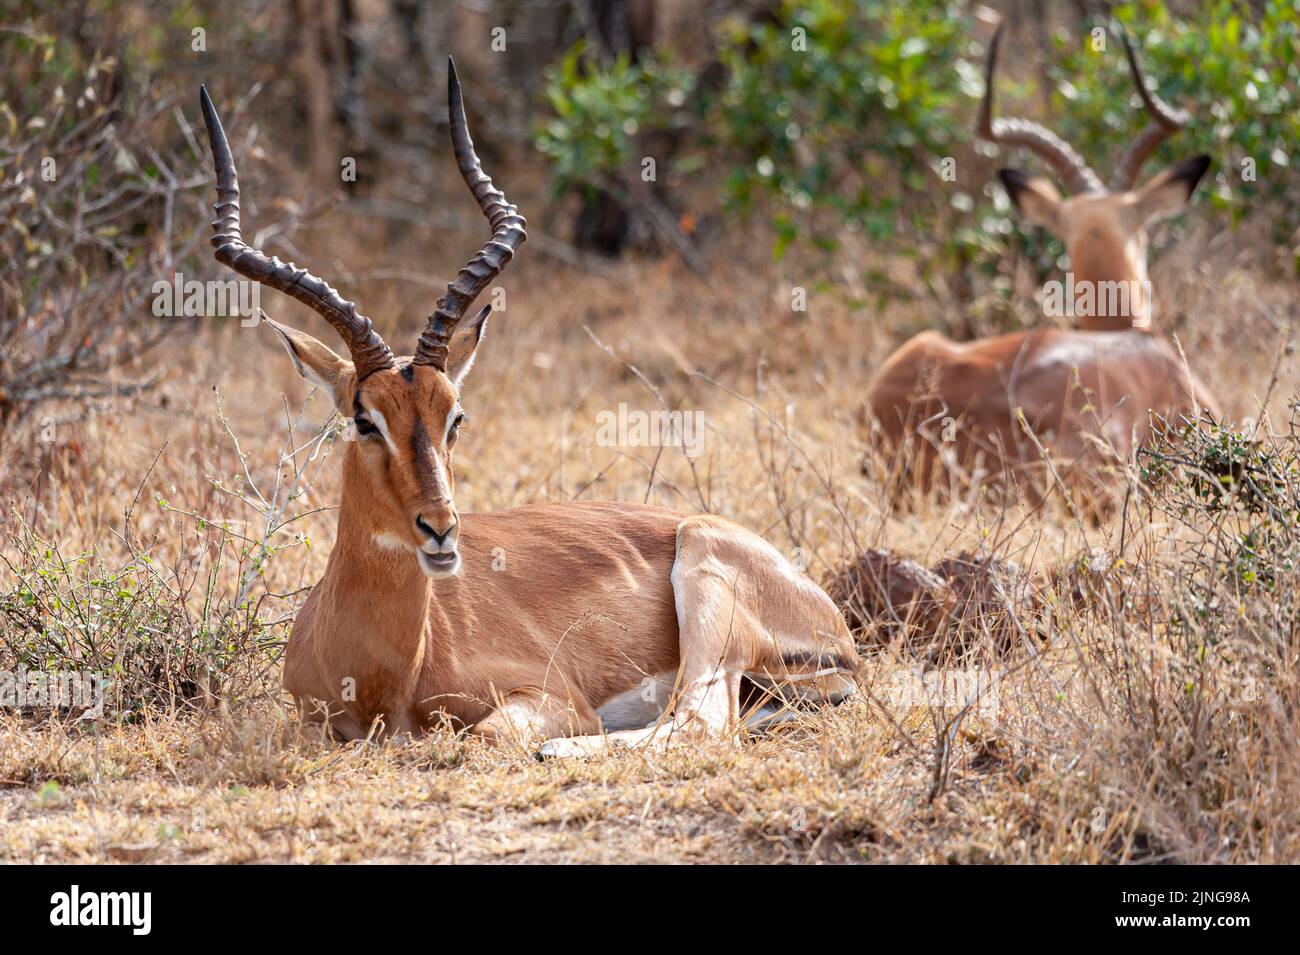 Two Impalas in their wild habitat, South Africa, wildlife observation Stock Photo